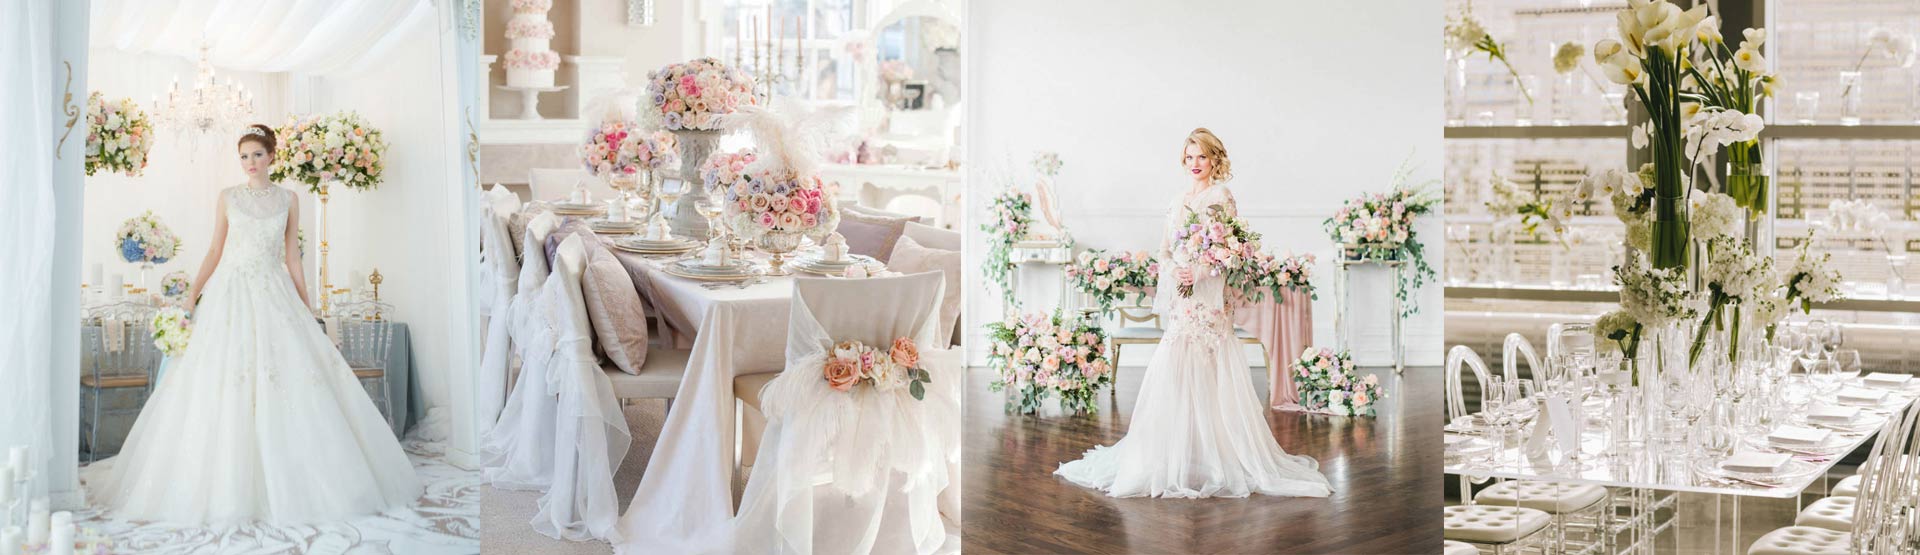 10 most popular wedding themes for every bridal style - onethreeonefour blog on what are the most popular wedding themes